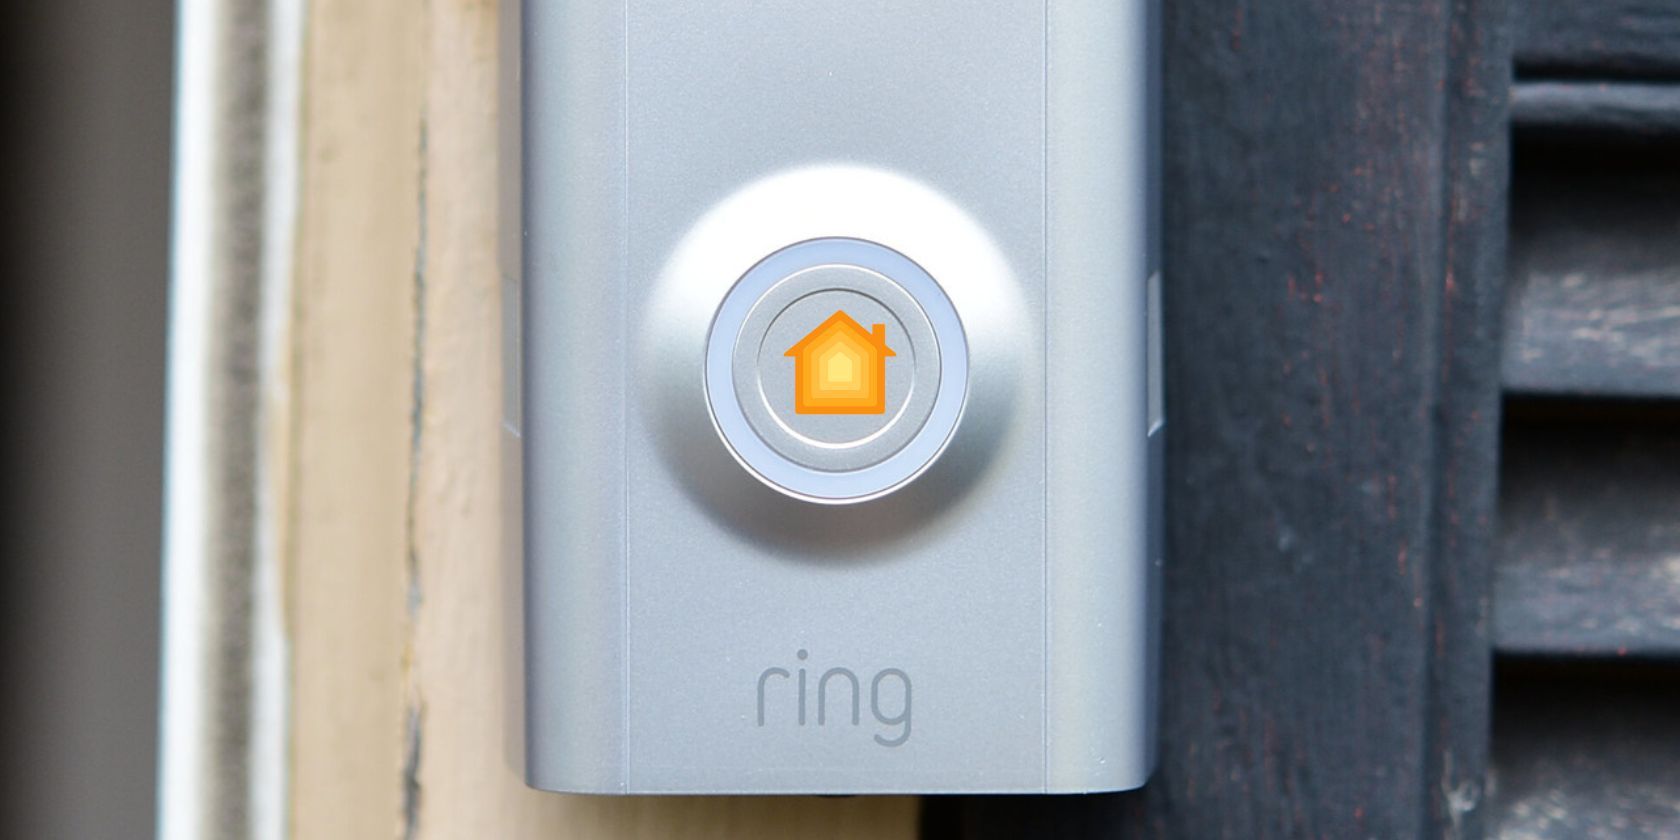 Buy RING Video Doorbell Pro 2 with Plug-In Adapter | Currys